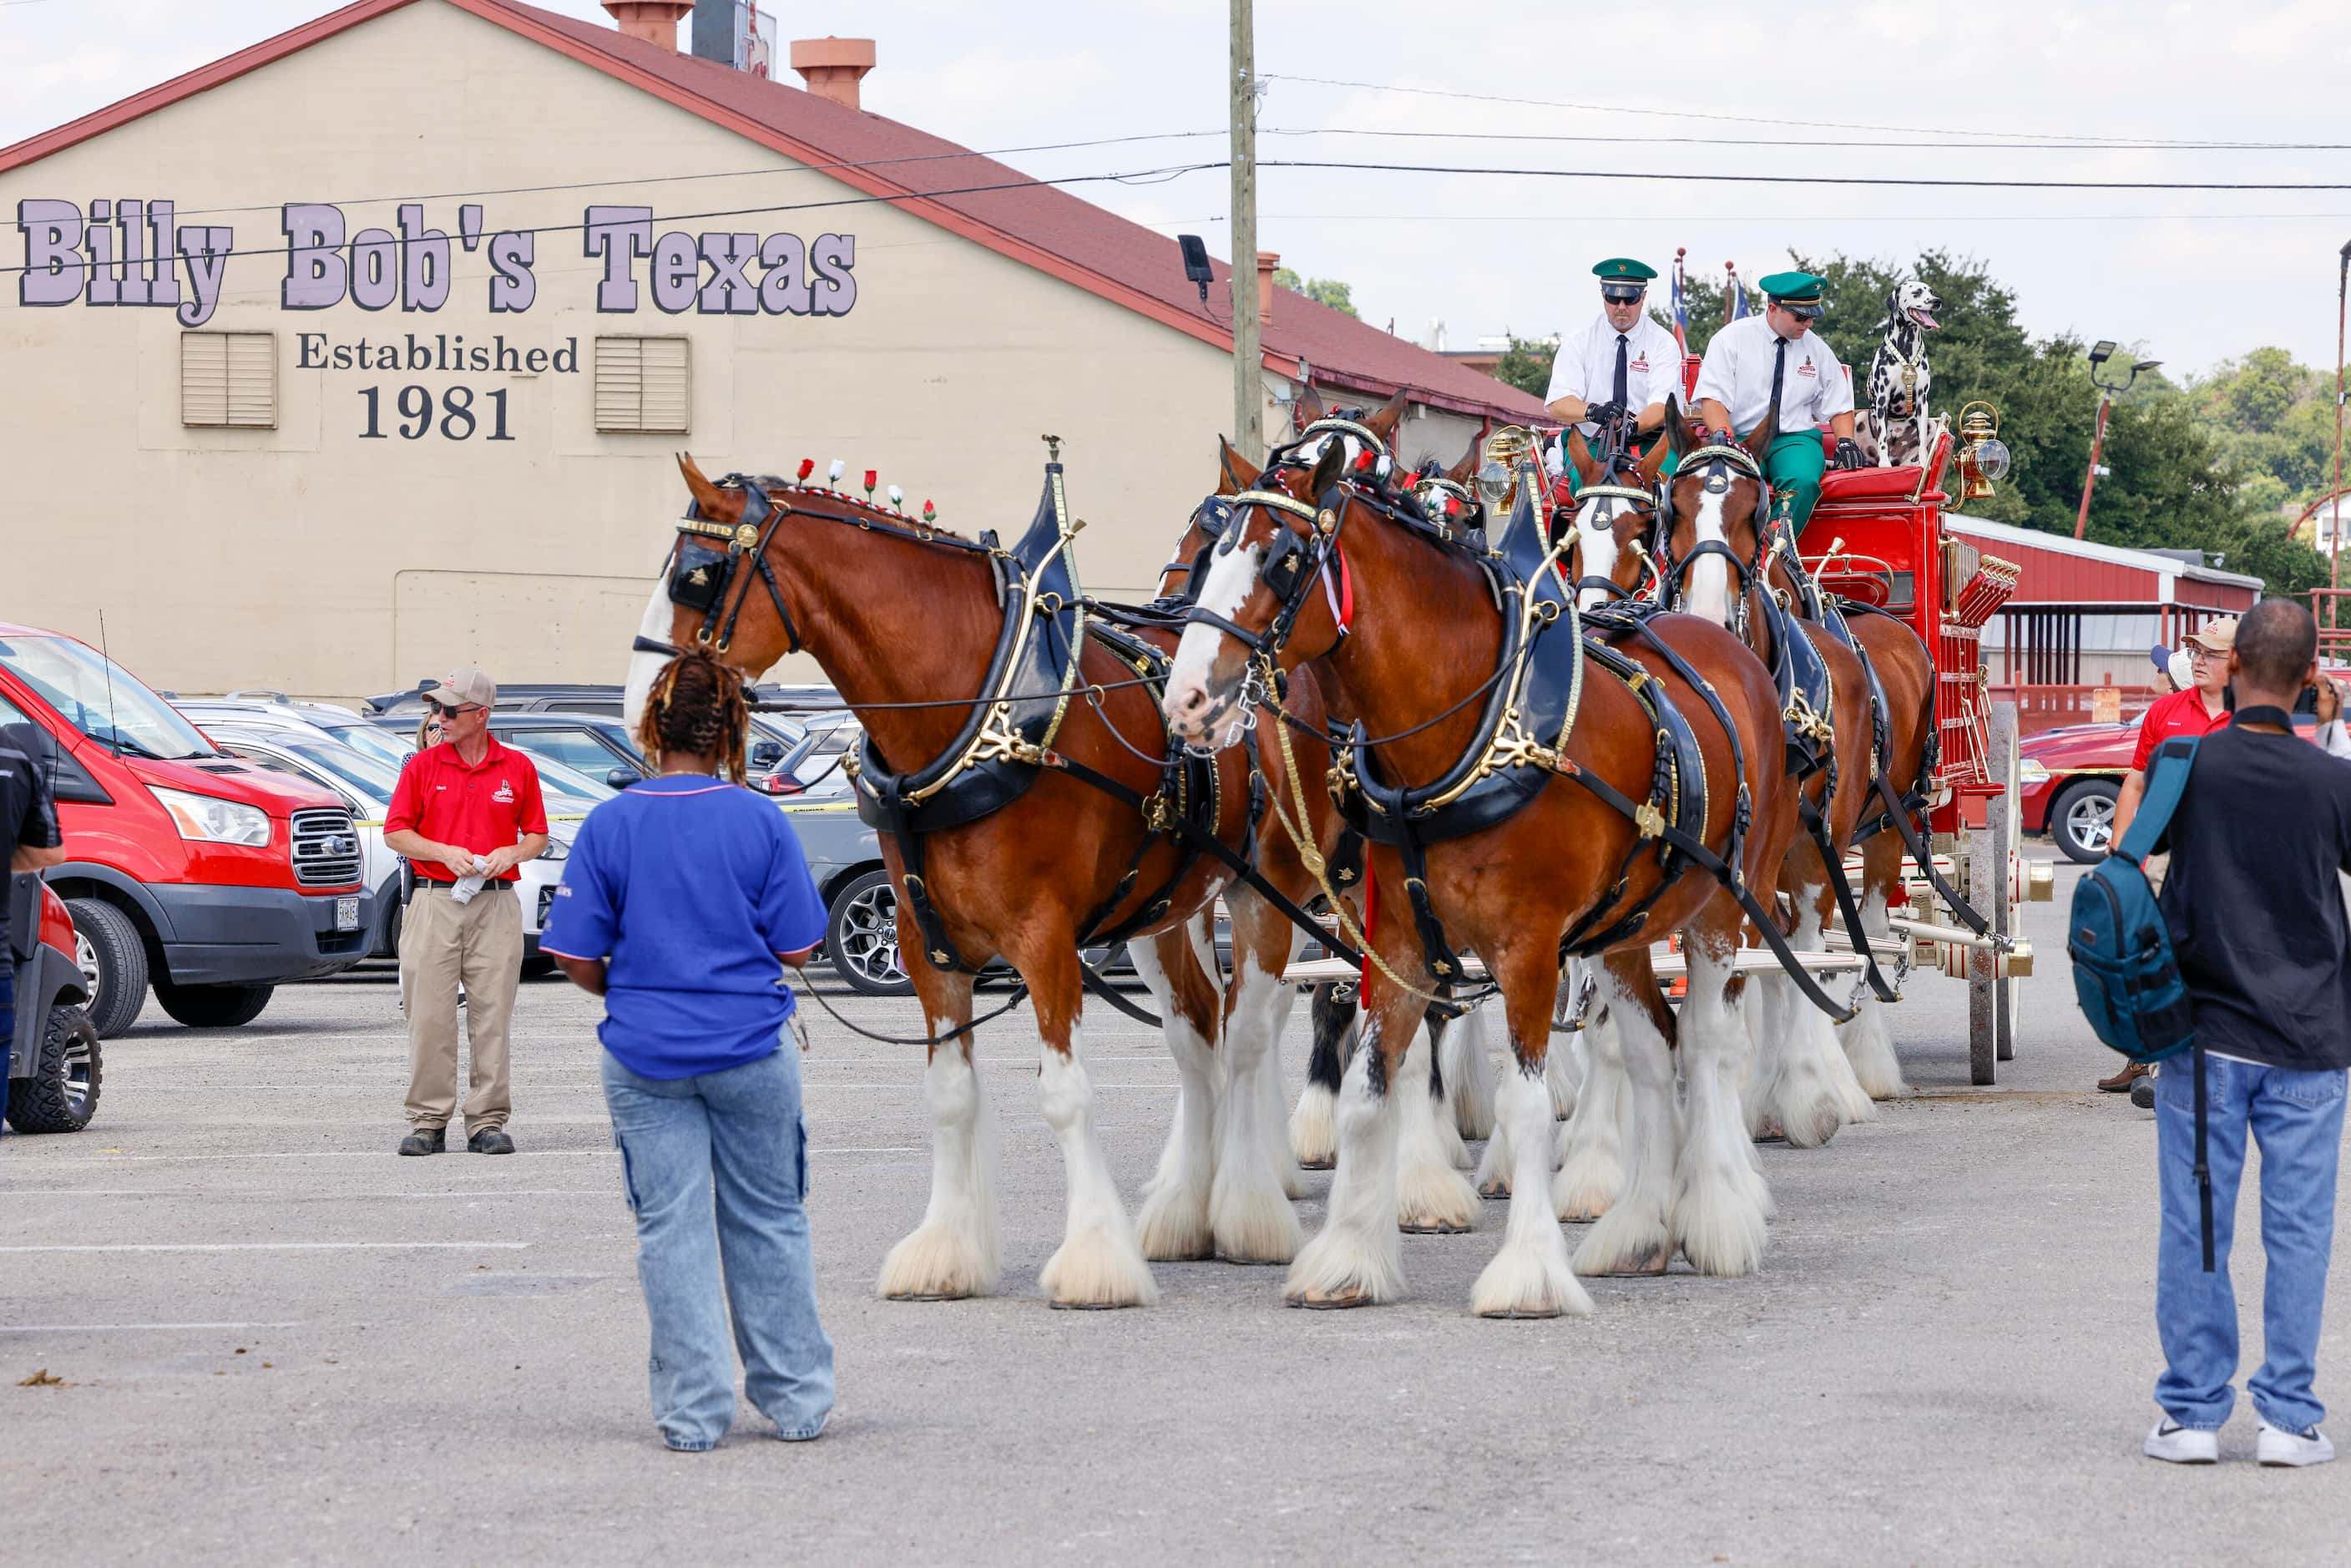 People take photos of the Budweiser Clydesdales as they prepare to make an old-school beer...